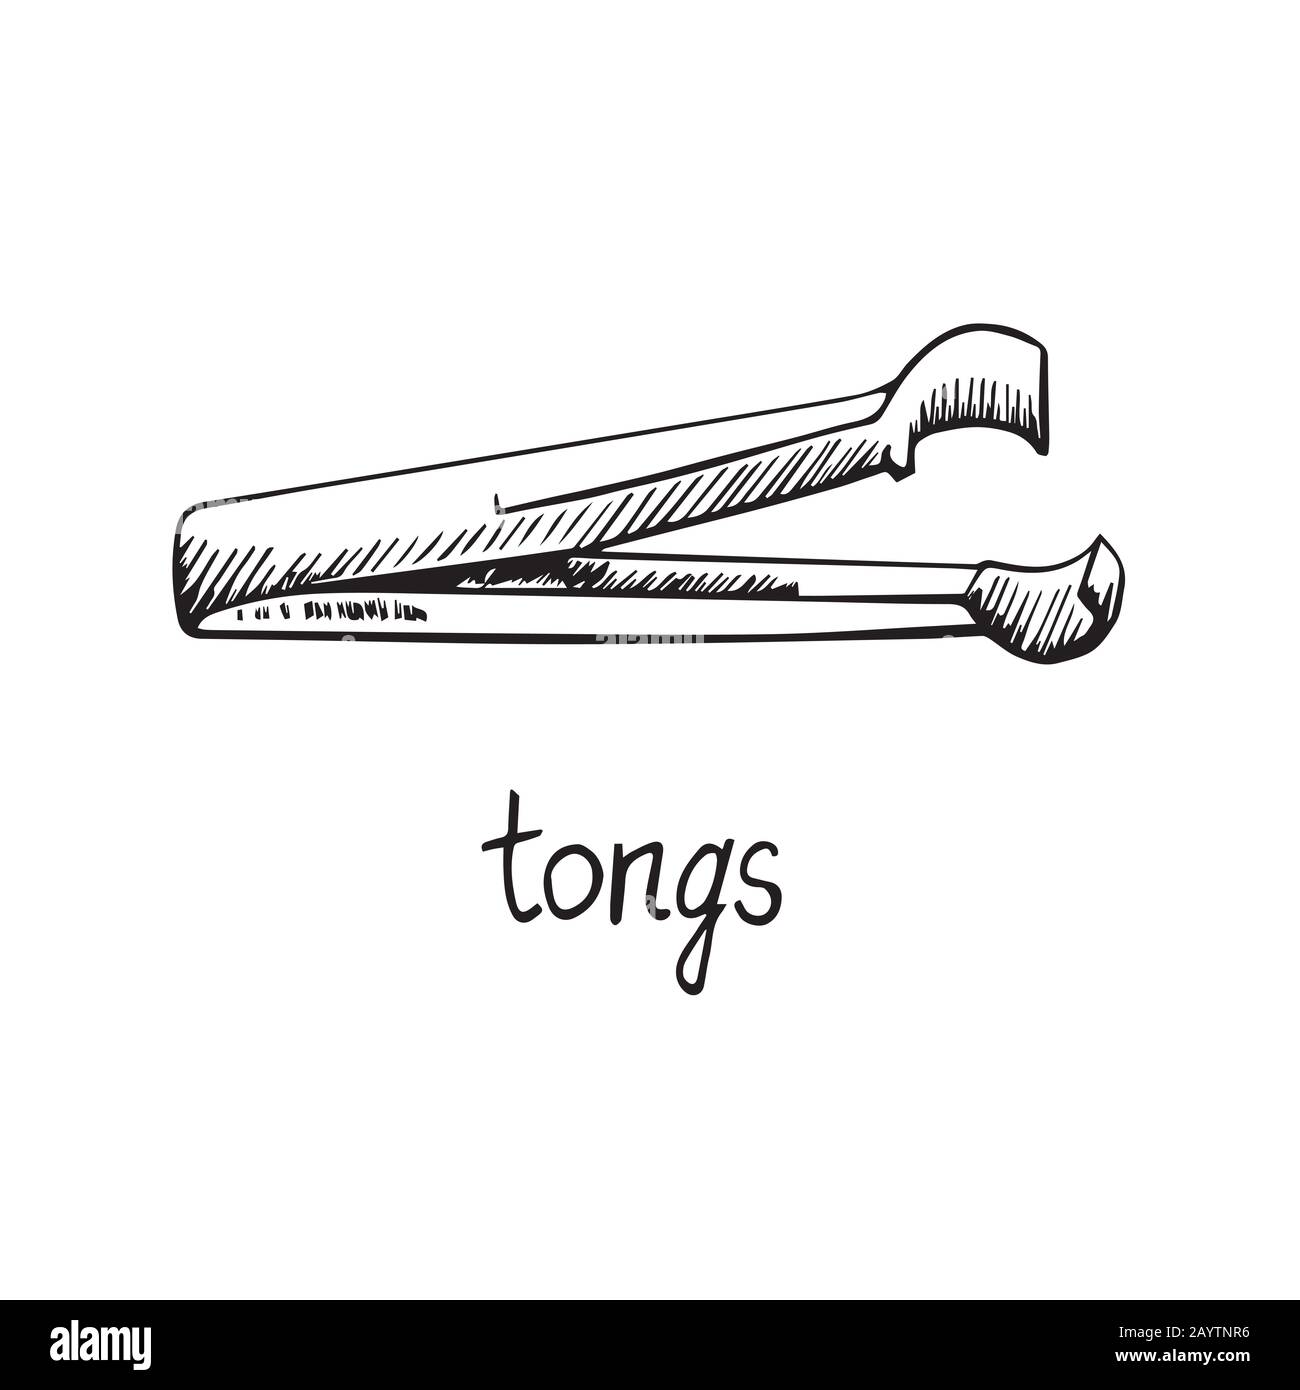 Tongs, hand drawn doodle sketch, black and white illustration Stock Photo -  Alamy